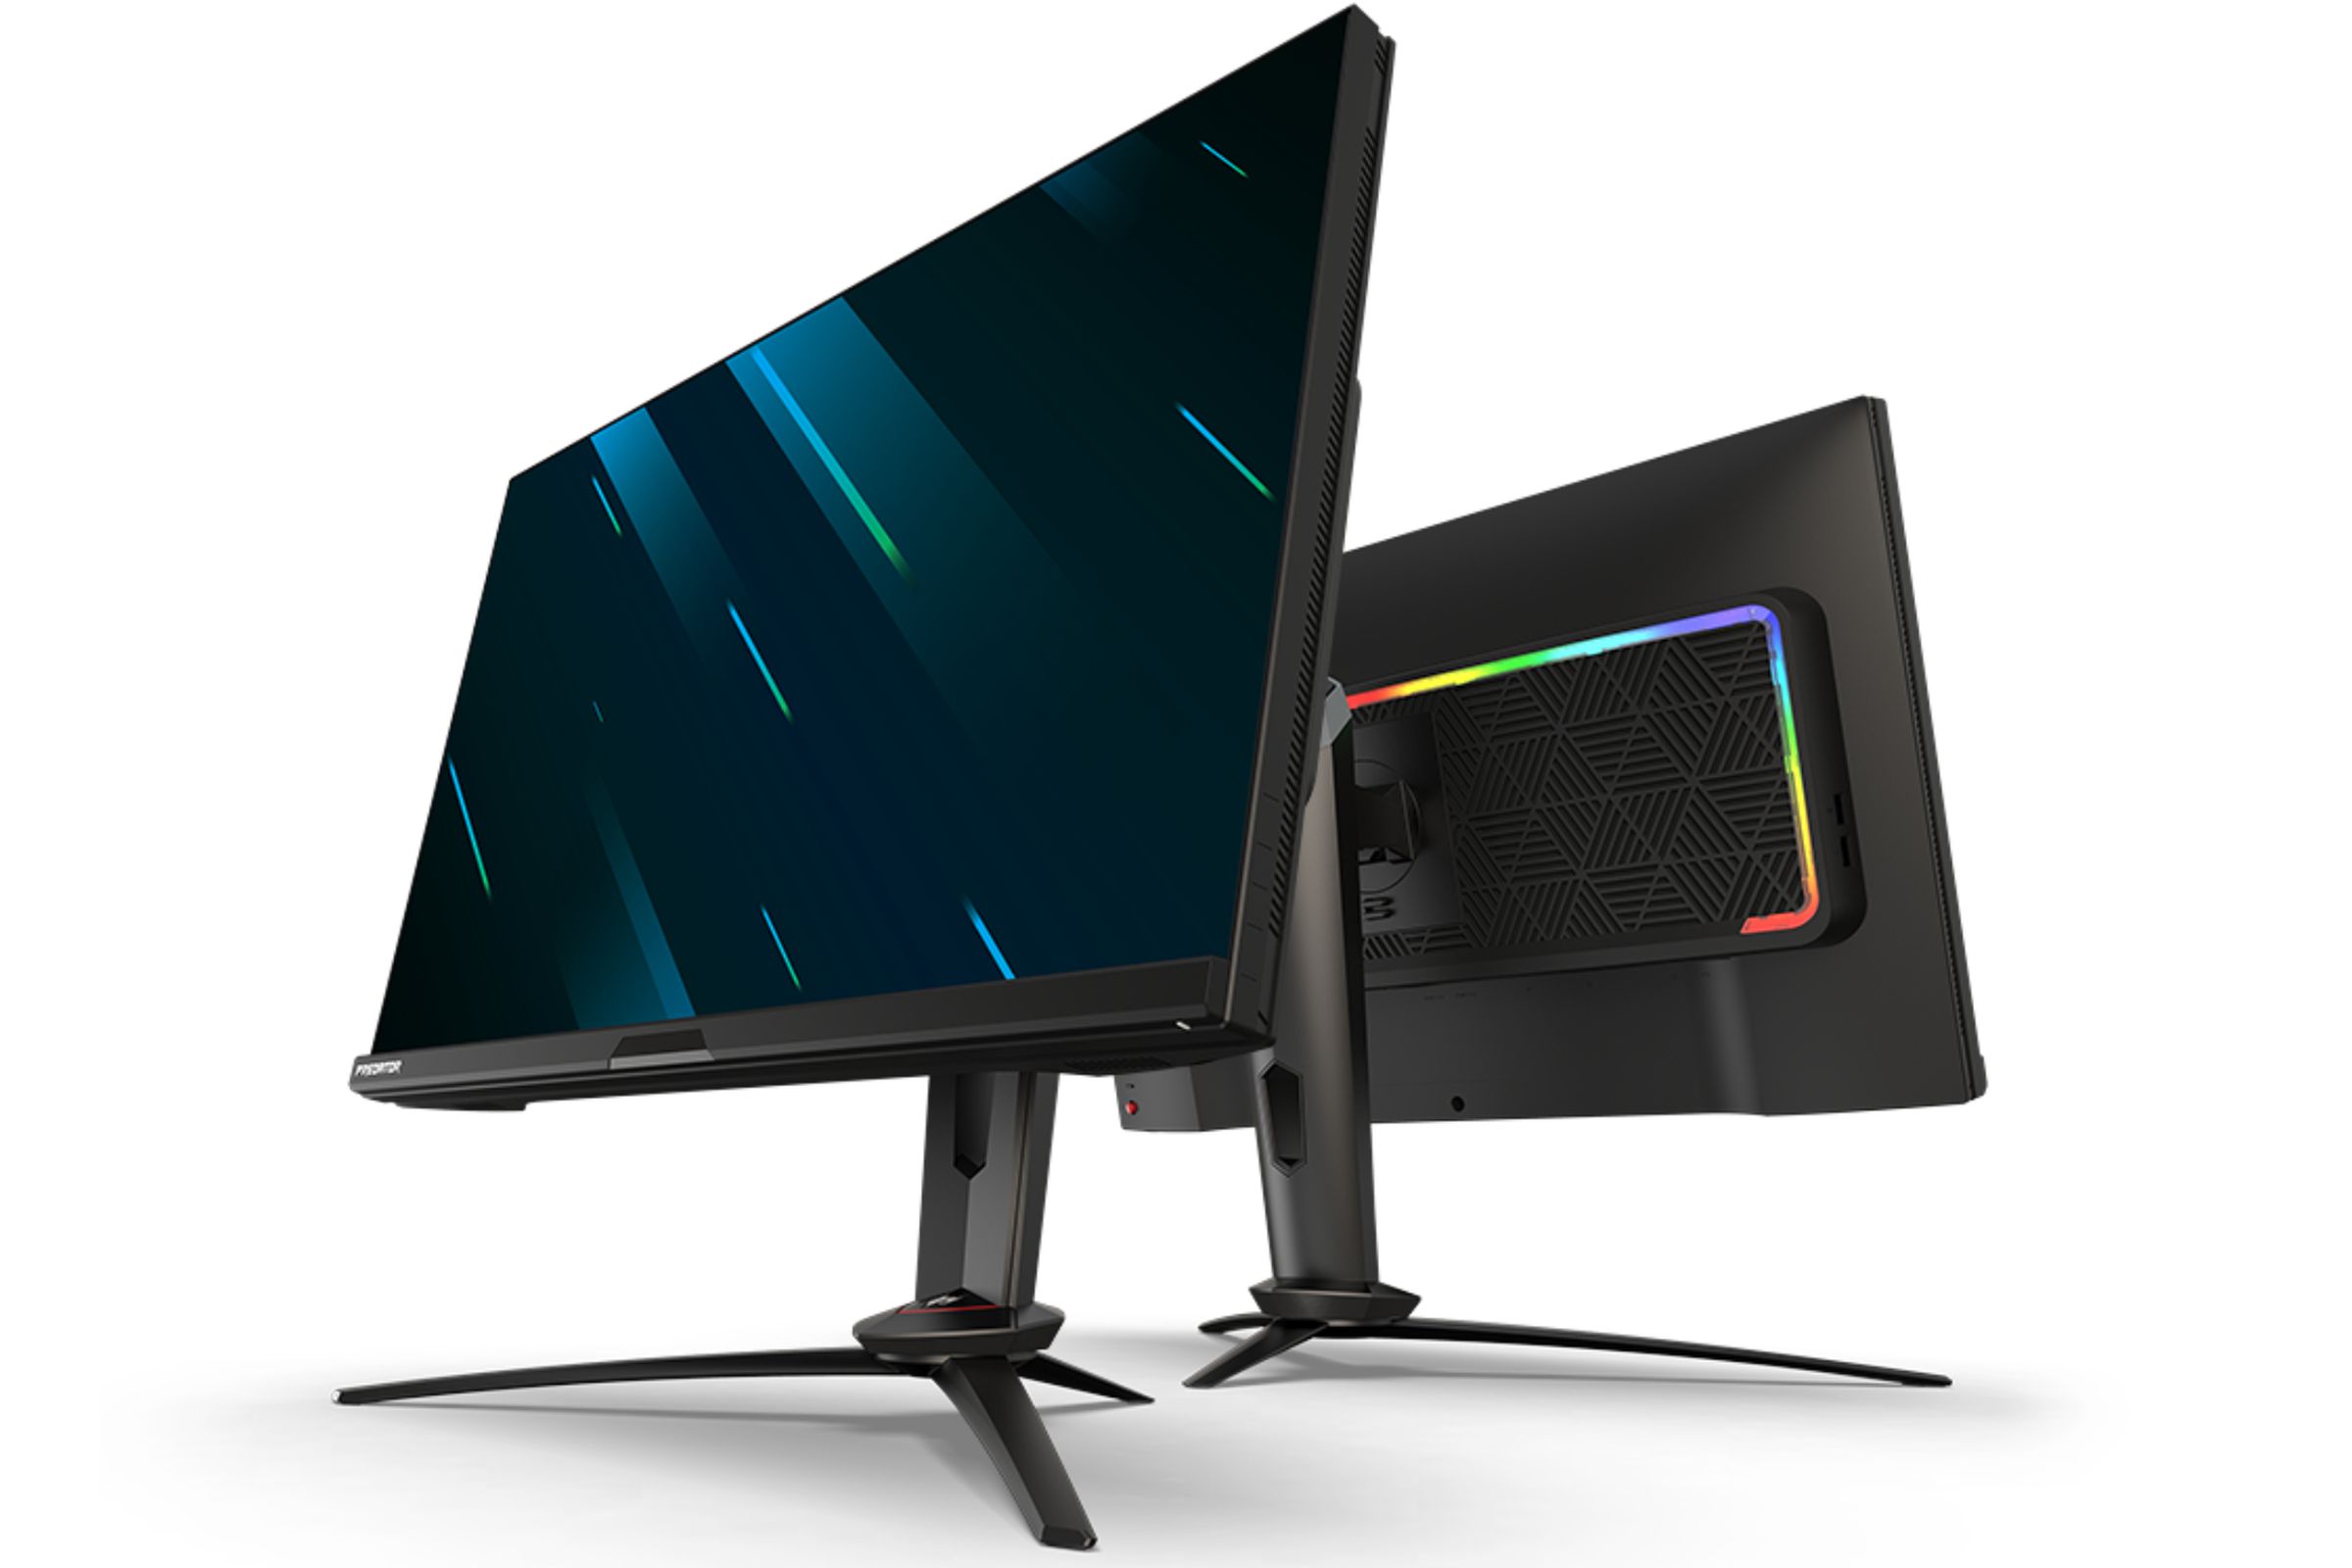 The XB273U NV claims to have features to help out your eyes. The RGB strip on the monitor’s back is easy on the eyes, too.